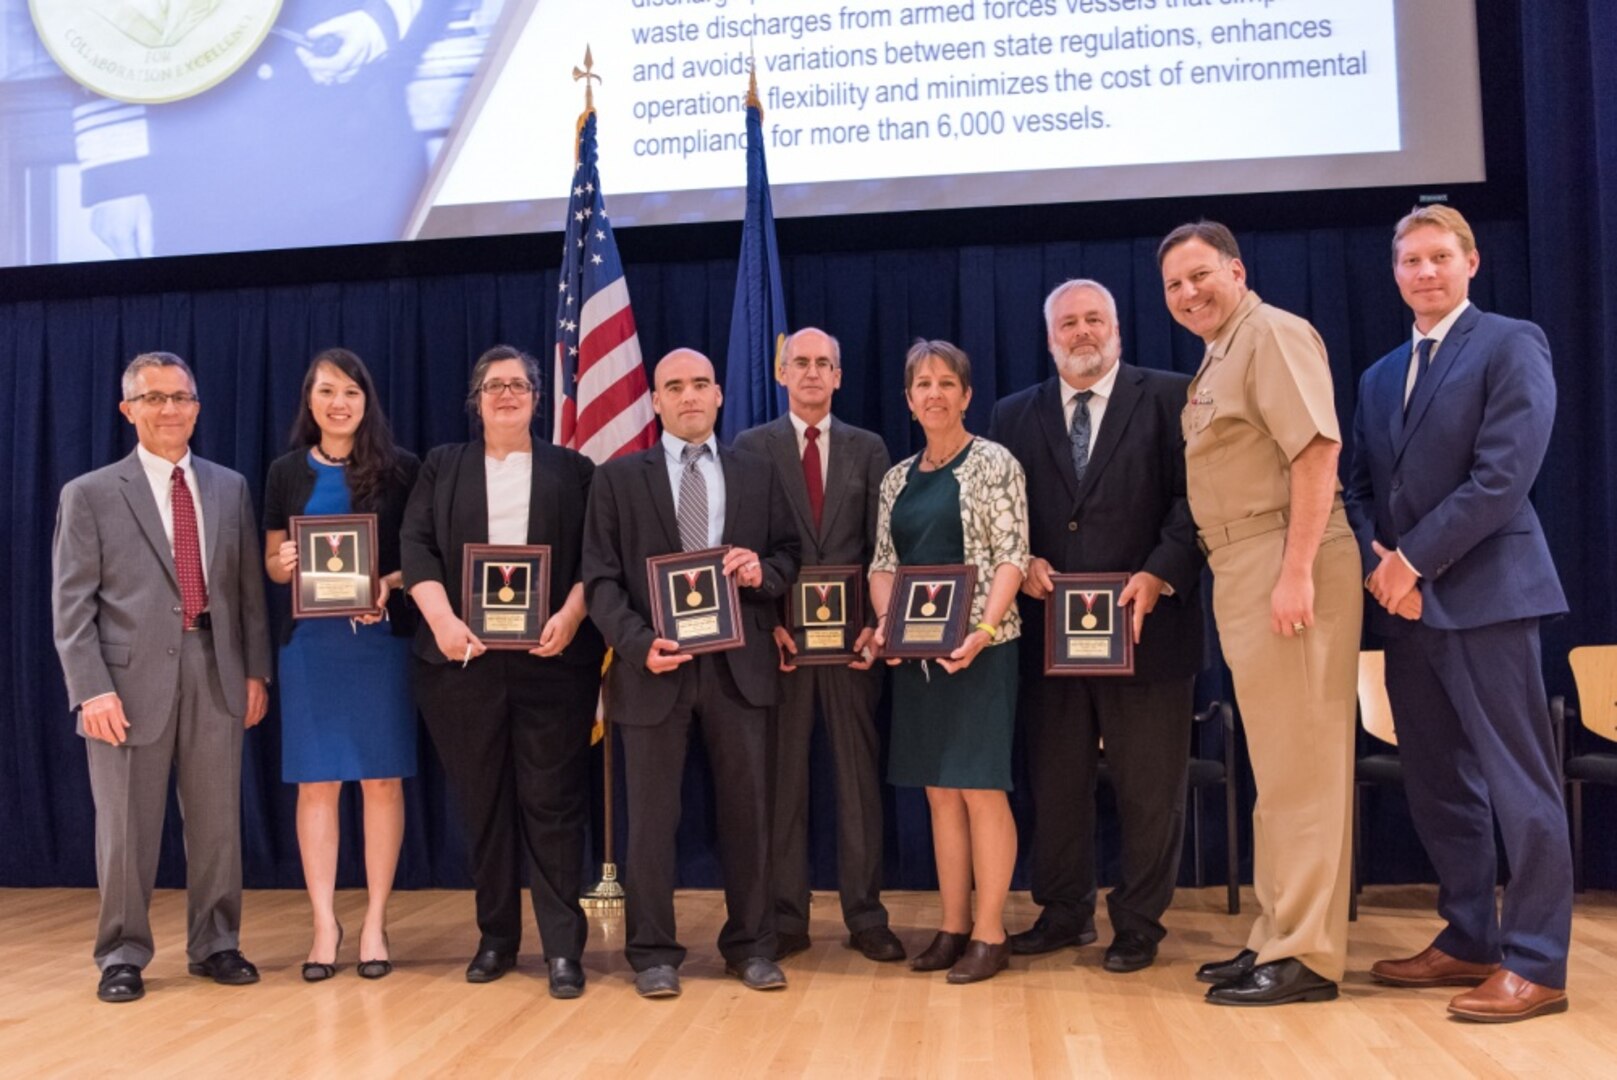 The Uniform National Discharge Standards (UNDS) Team receives the Vice Adm. Emory S. Land Award for collaboration excellence at the Naval Surface Warfare Center, Carderock Division Honor Awards ceremony Aug. 1, 2017, in West Bethesda, Md. From left to right: Technical Director Dr. Tim Arcano; Christine Park; Rachel Jacobs; Toby Cole; Dr. Eric Holm; Rita Schuh; Gordon Smith; Commanding Officer Capt. Mark Vandroff; and Survivability, Structures, Materials and Environmental Department Head (Acting) Ross Hempel. Not pictured are Cindy Chen and Leslie DeMichele. (U.S. Navy photo by Jake Cirksena/Released)